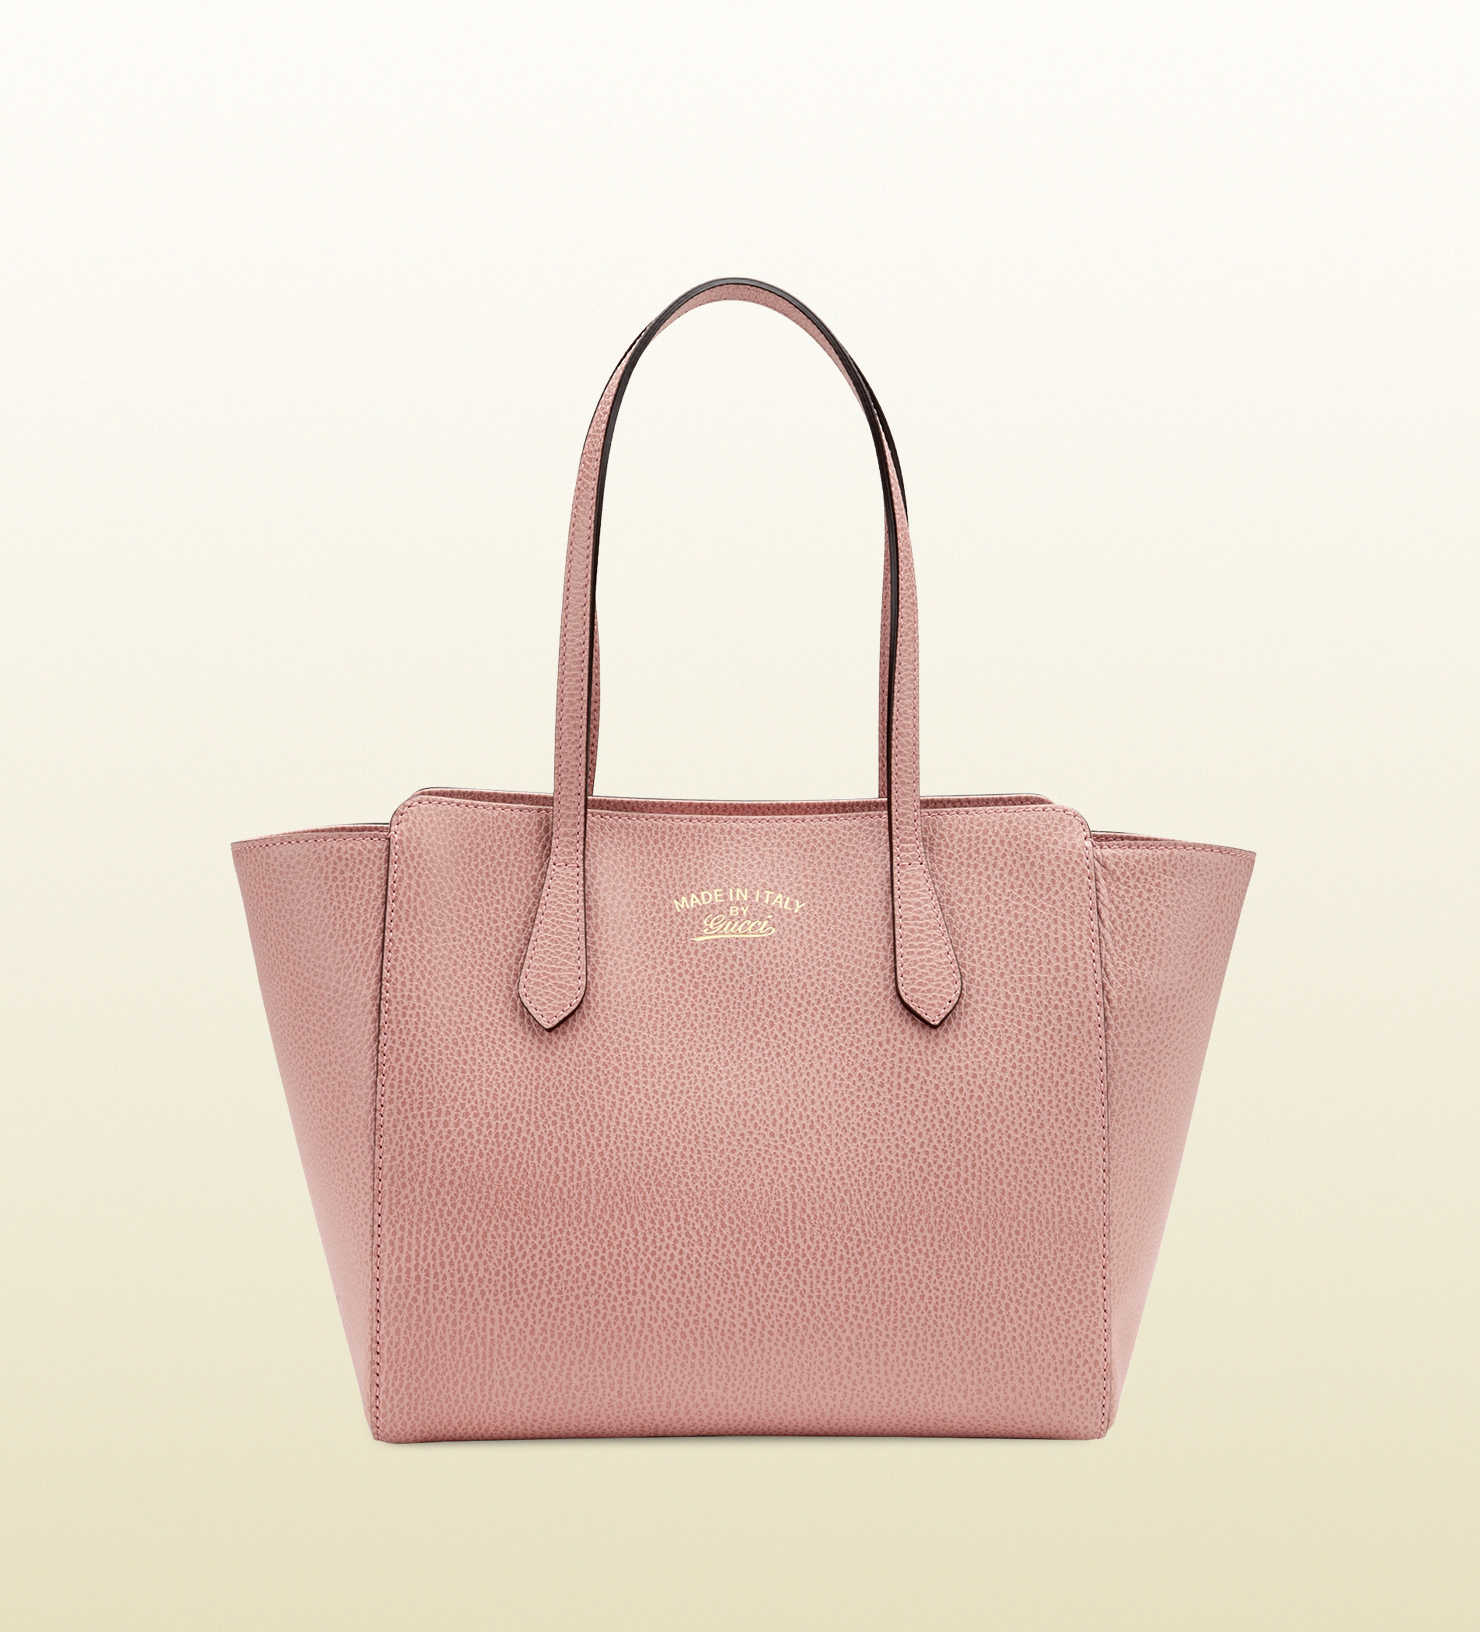 Lyst - Gucci Swing Leather Tote in Pink